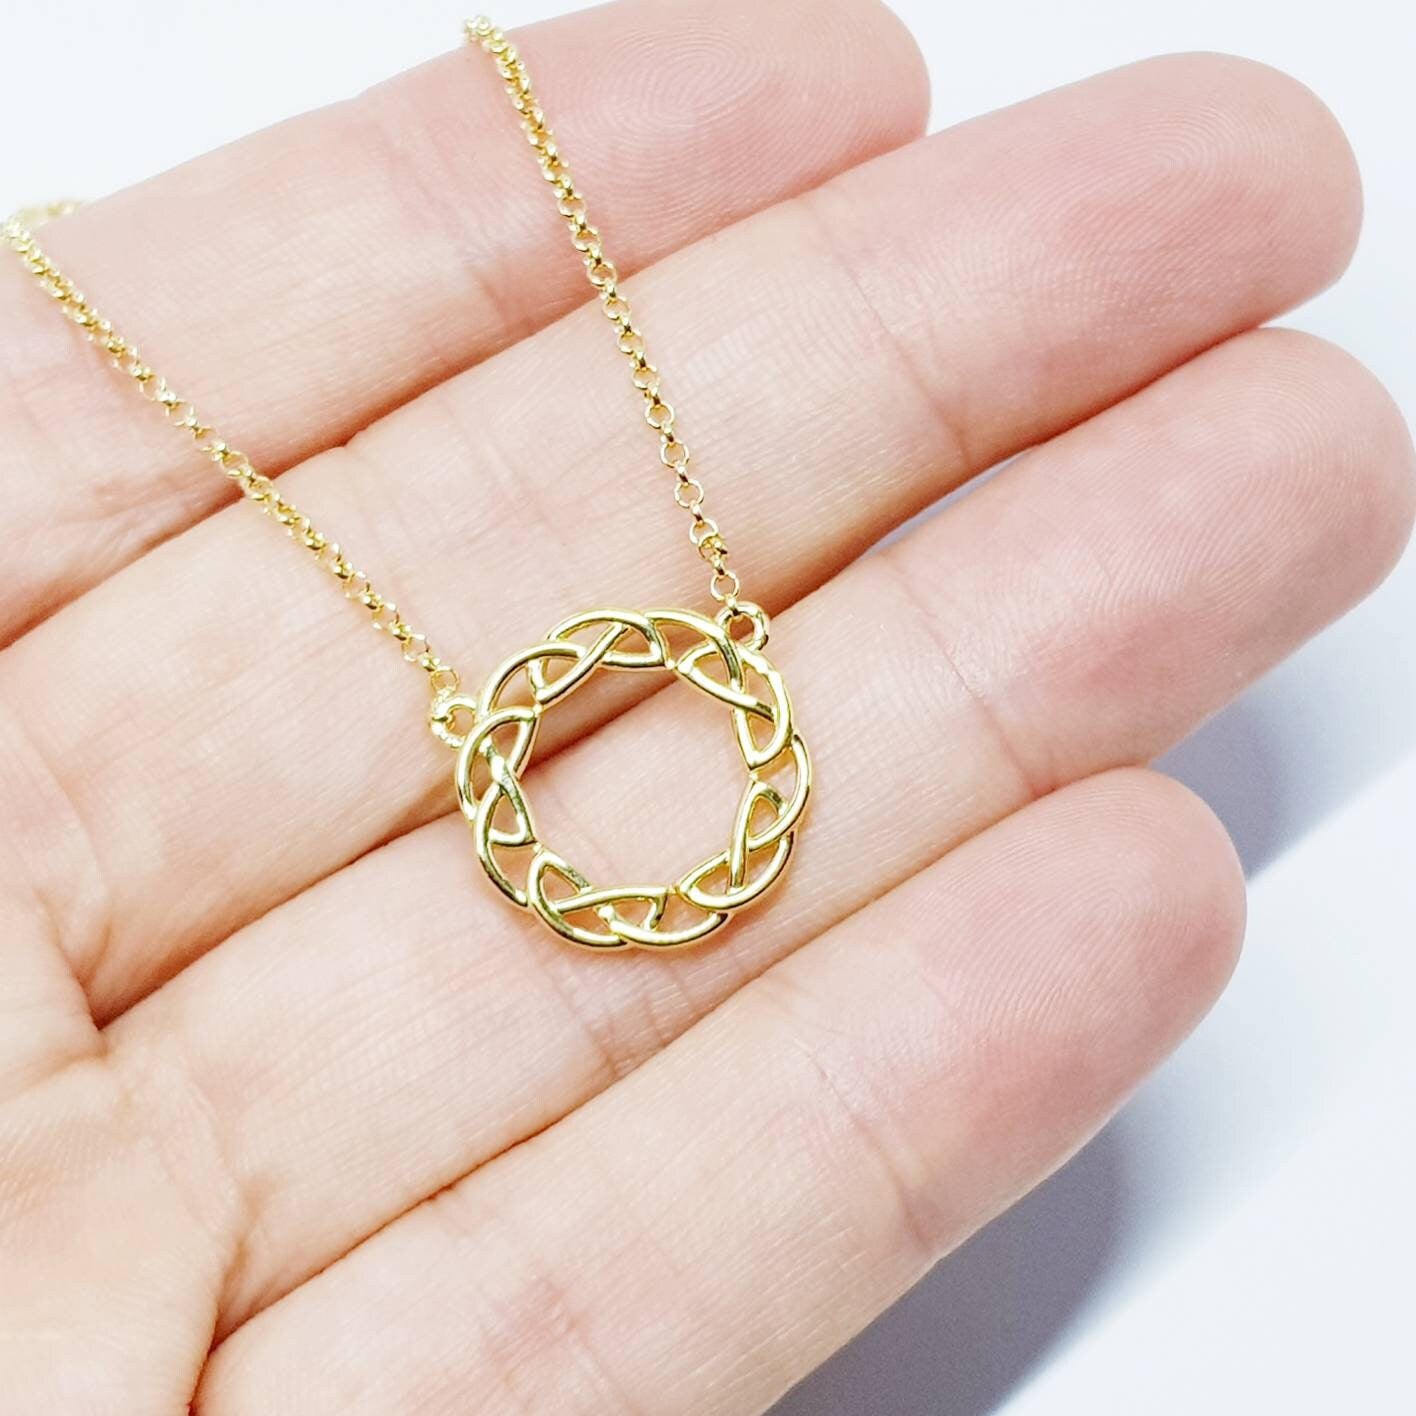 Sterling silver celtic knot pendant, gold round celtic necklace made in Ireland with angel wing chain